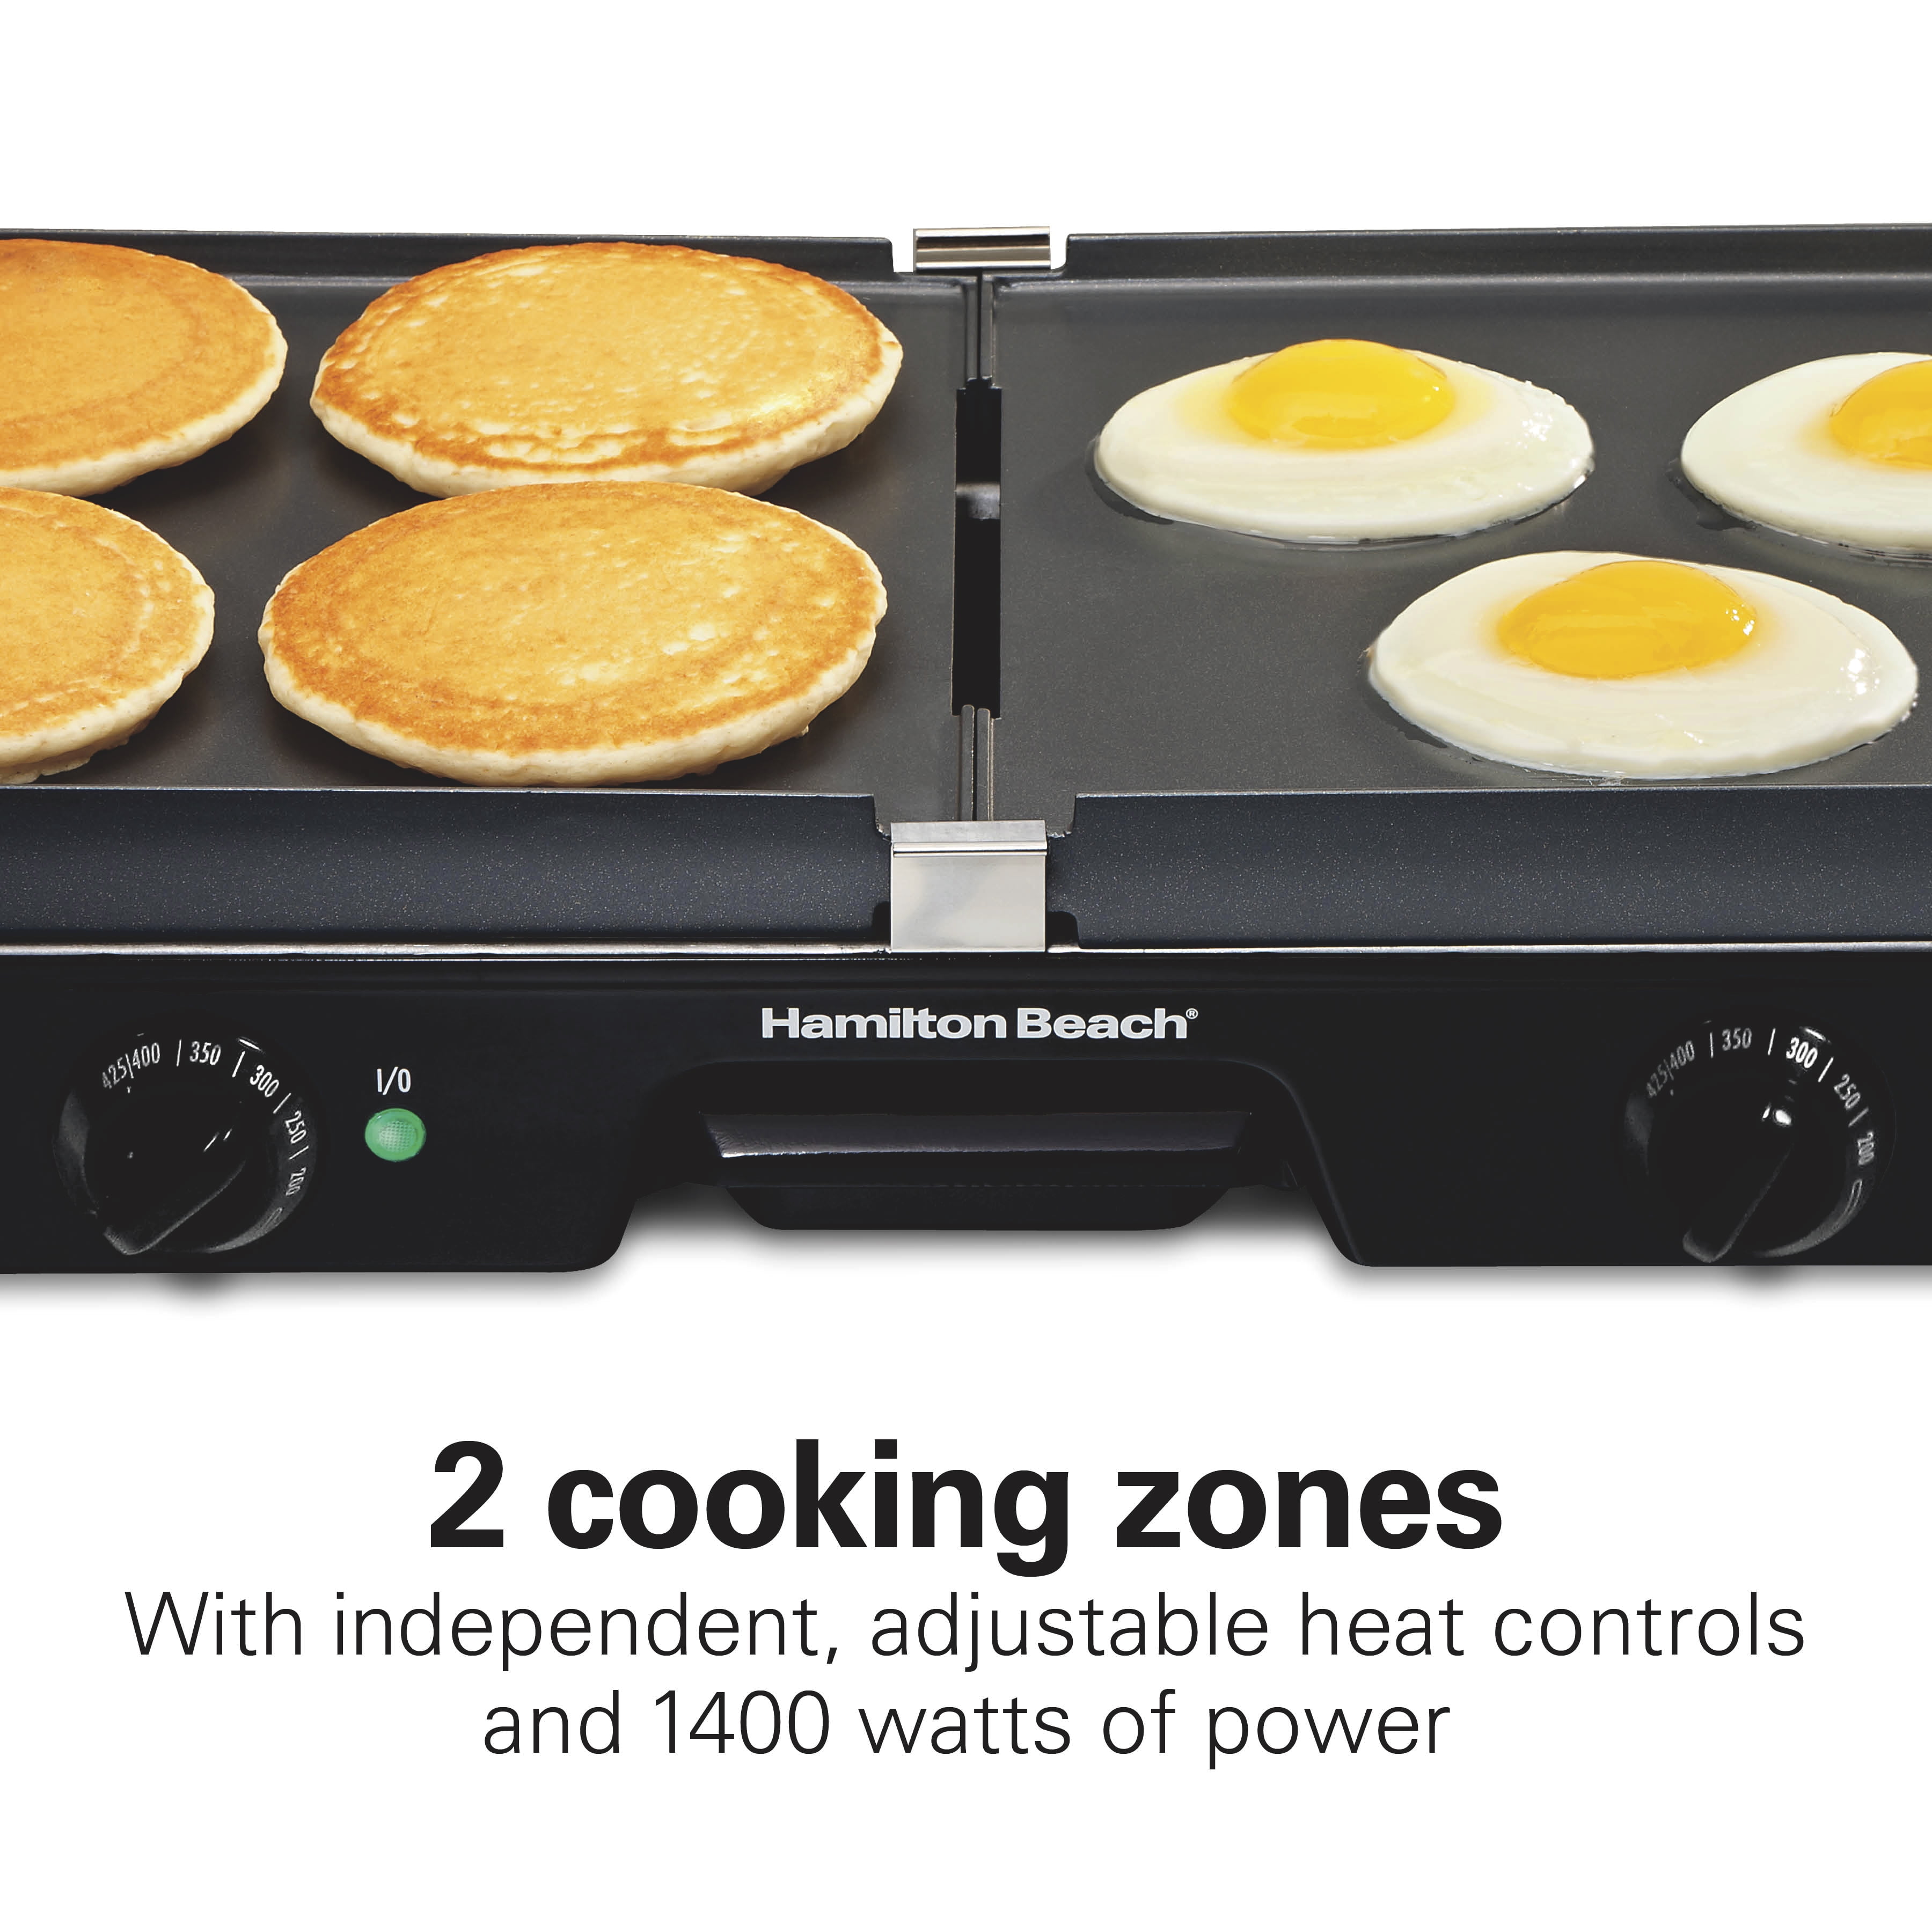 Hamilton Beach 3-in-1 Indoor Grill and Electric Griddle,Grill and Bacon  Cooker Combo,Opens 180 Degrees to Double Cooking Space